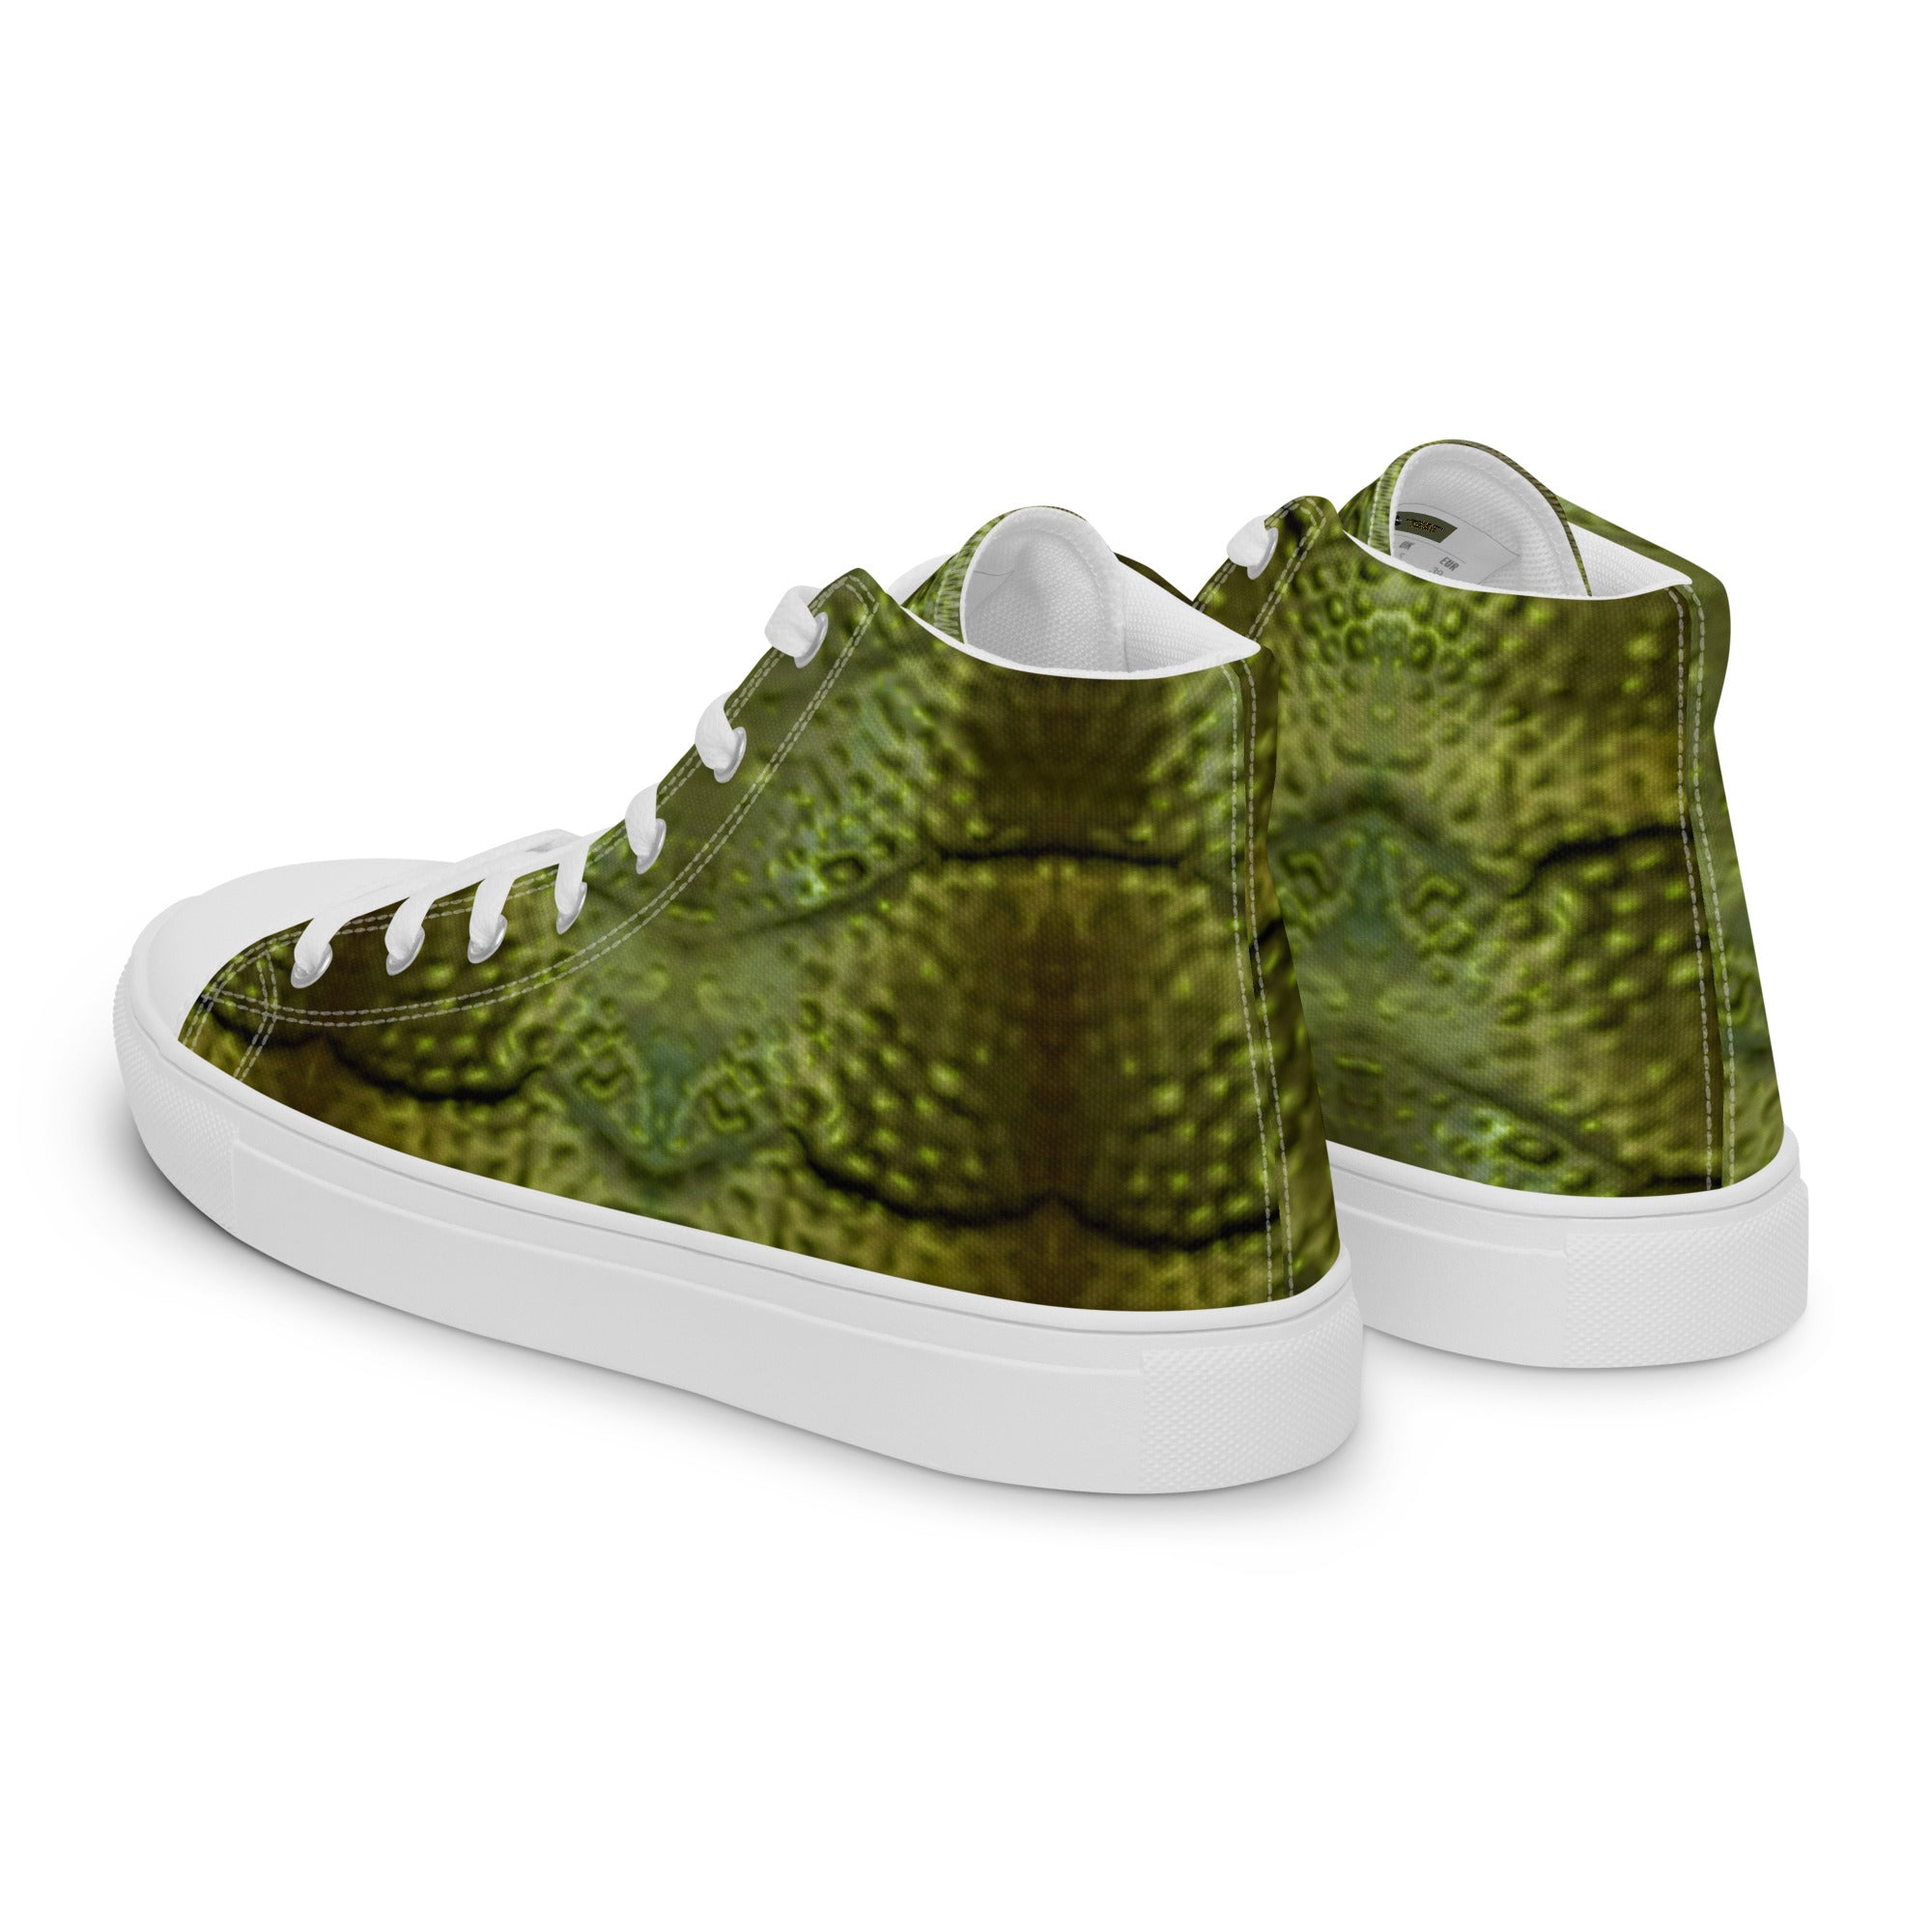 Women’s Creature From The Black Lagoon Inspired High Top Canvas Shoes